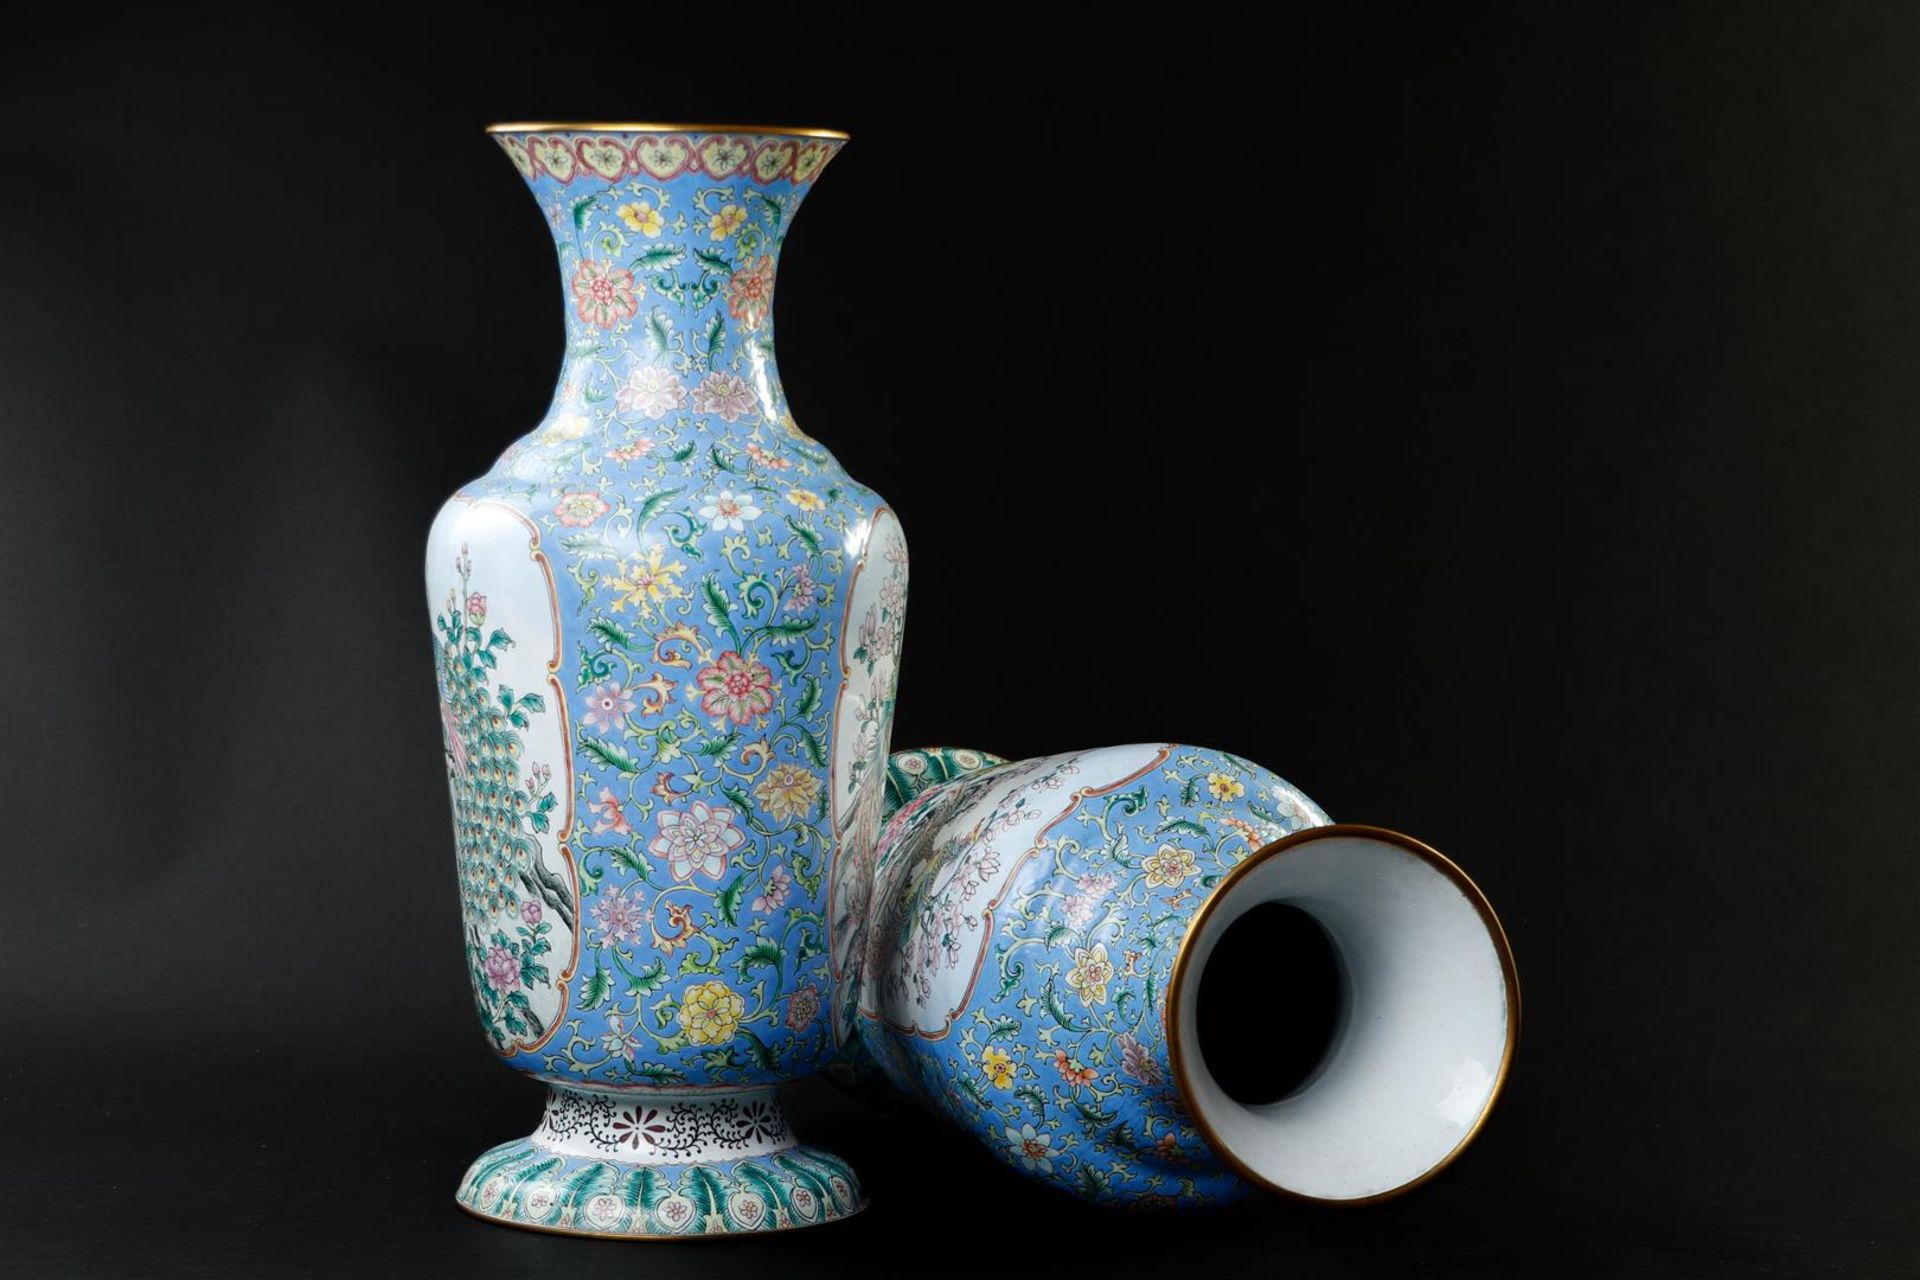 A pair of enamel famille rose vases depicting peacocks. China, 20th century.
H. 44 cm. - Image 5 of 6